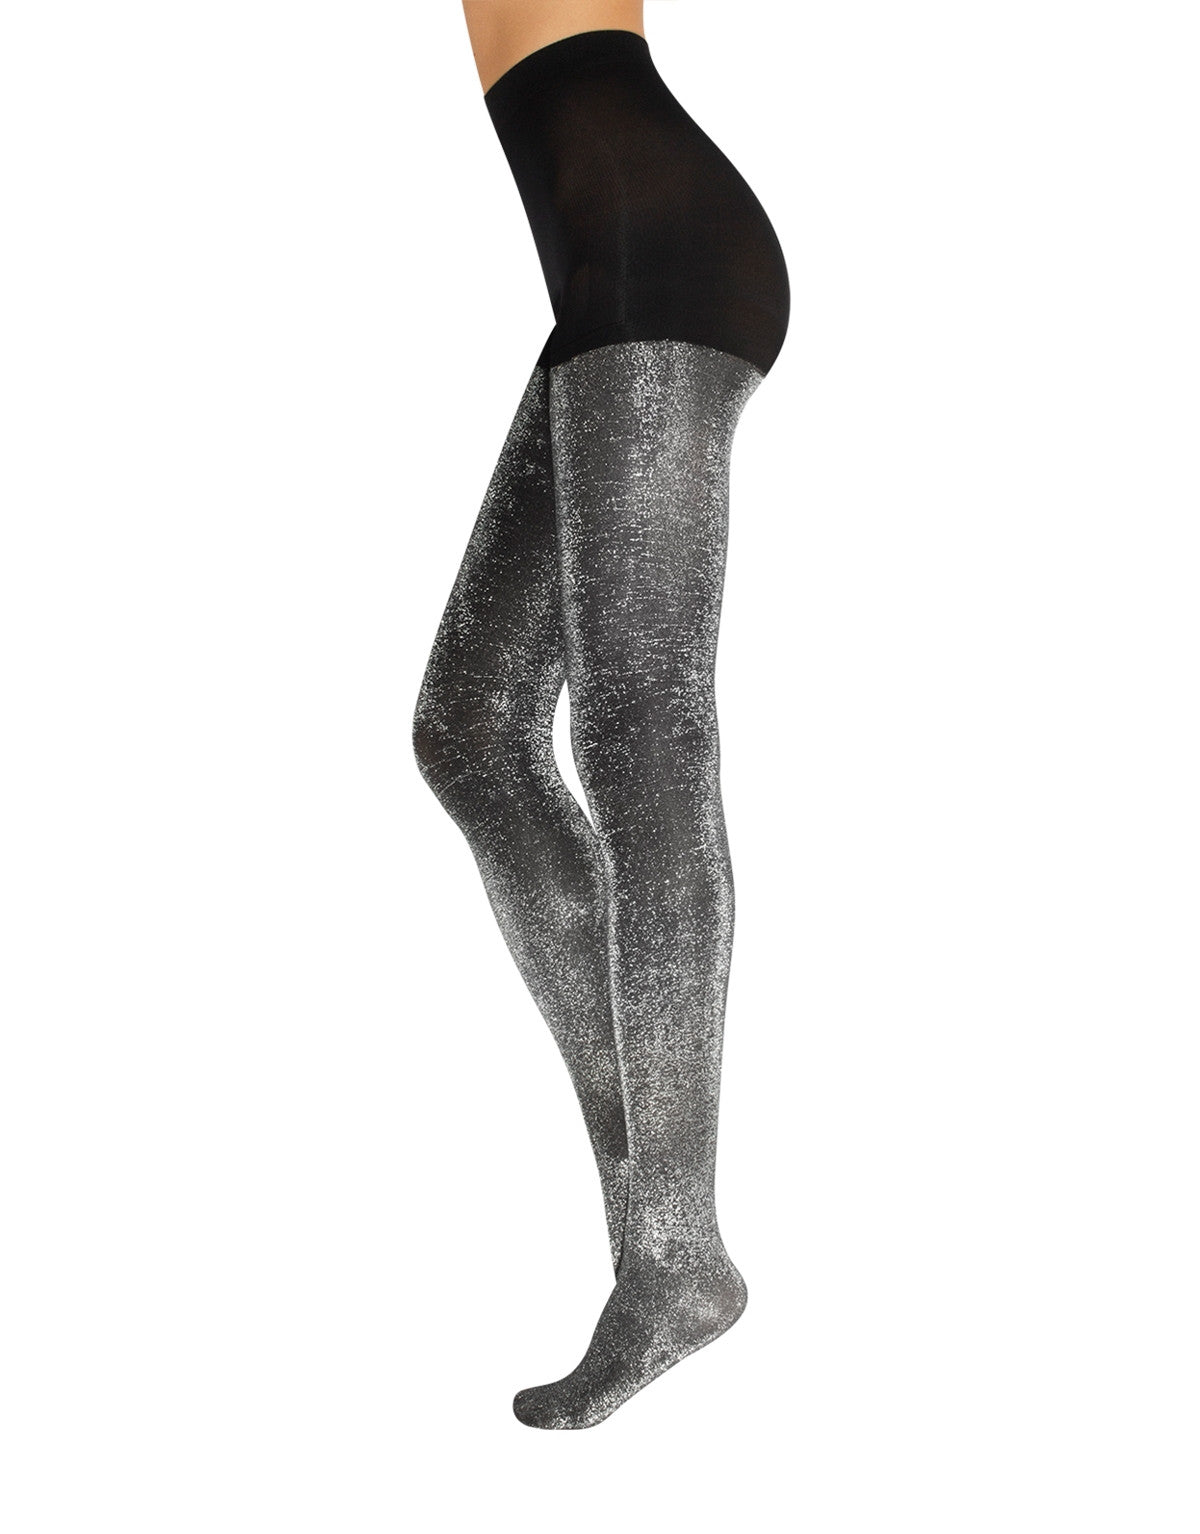 Calzitaly Shiny Lurex Tights - Sparkly lam̩ opaque fashion tights with in black and silver.